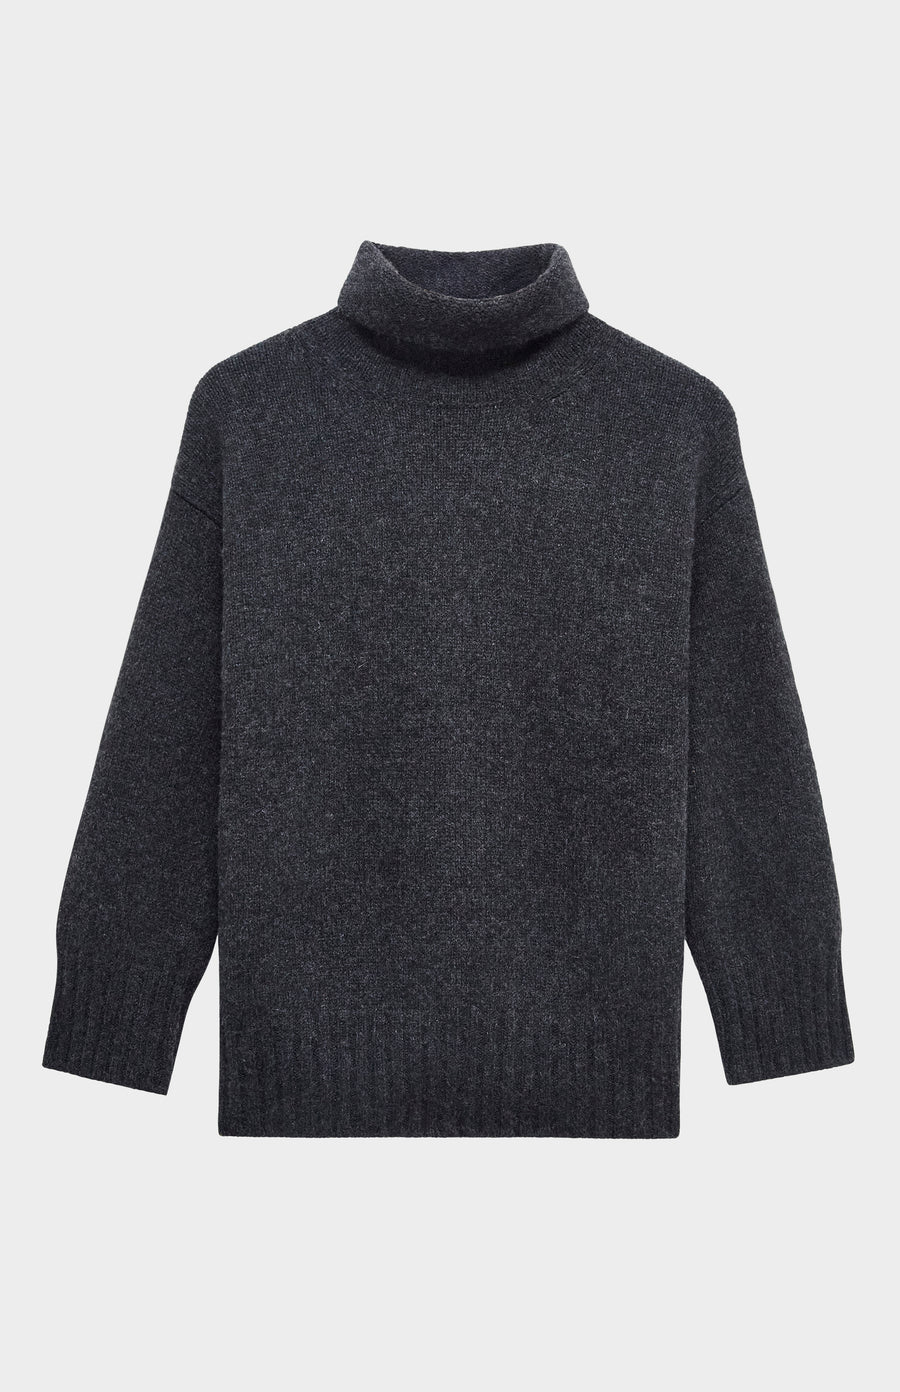 Pringle of Scotland High Neck Cosy Cashmere Jumper In Charcoal